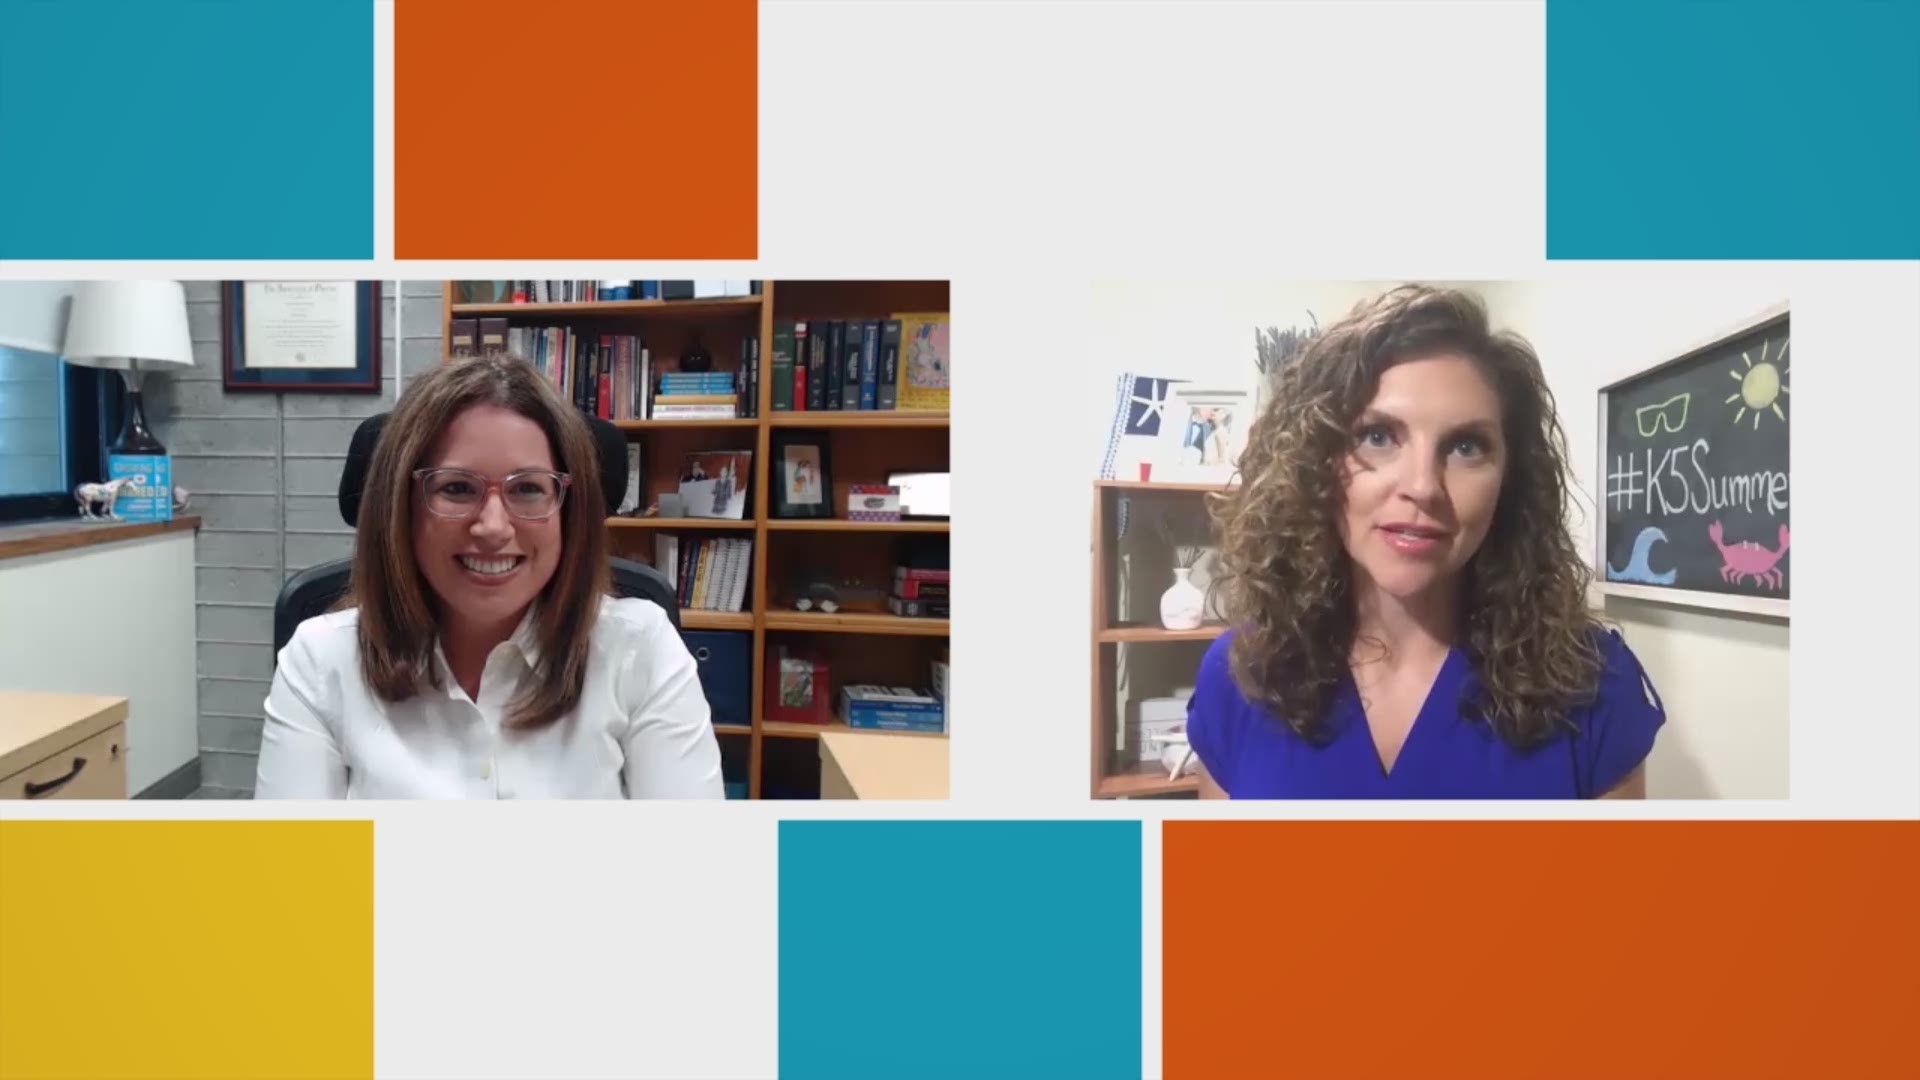 Watch Jordan's full conversation with Stacey Steinberg, Author of Growing Up Shared